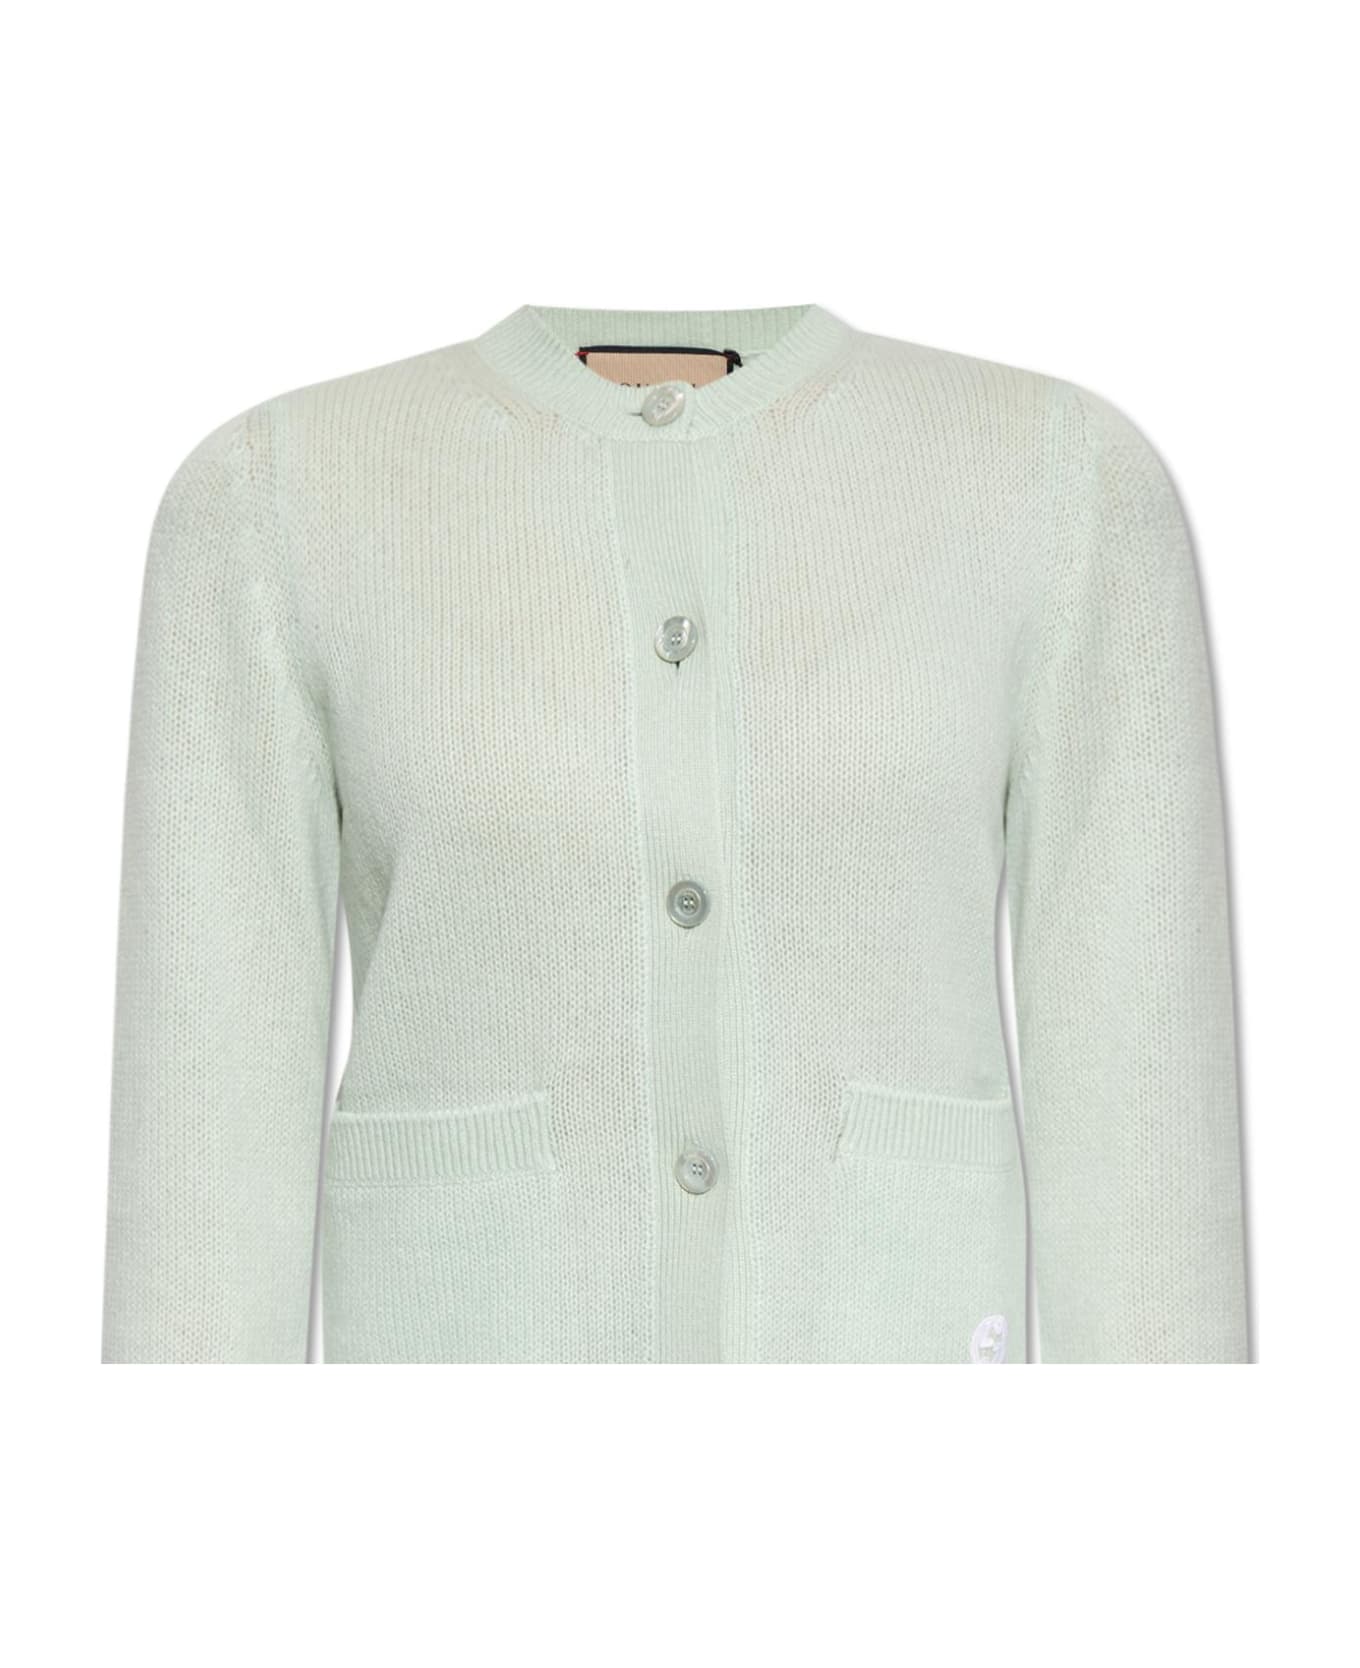 Gucci Buttoned Cardigan - Pale Mint カーディガン